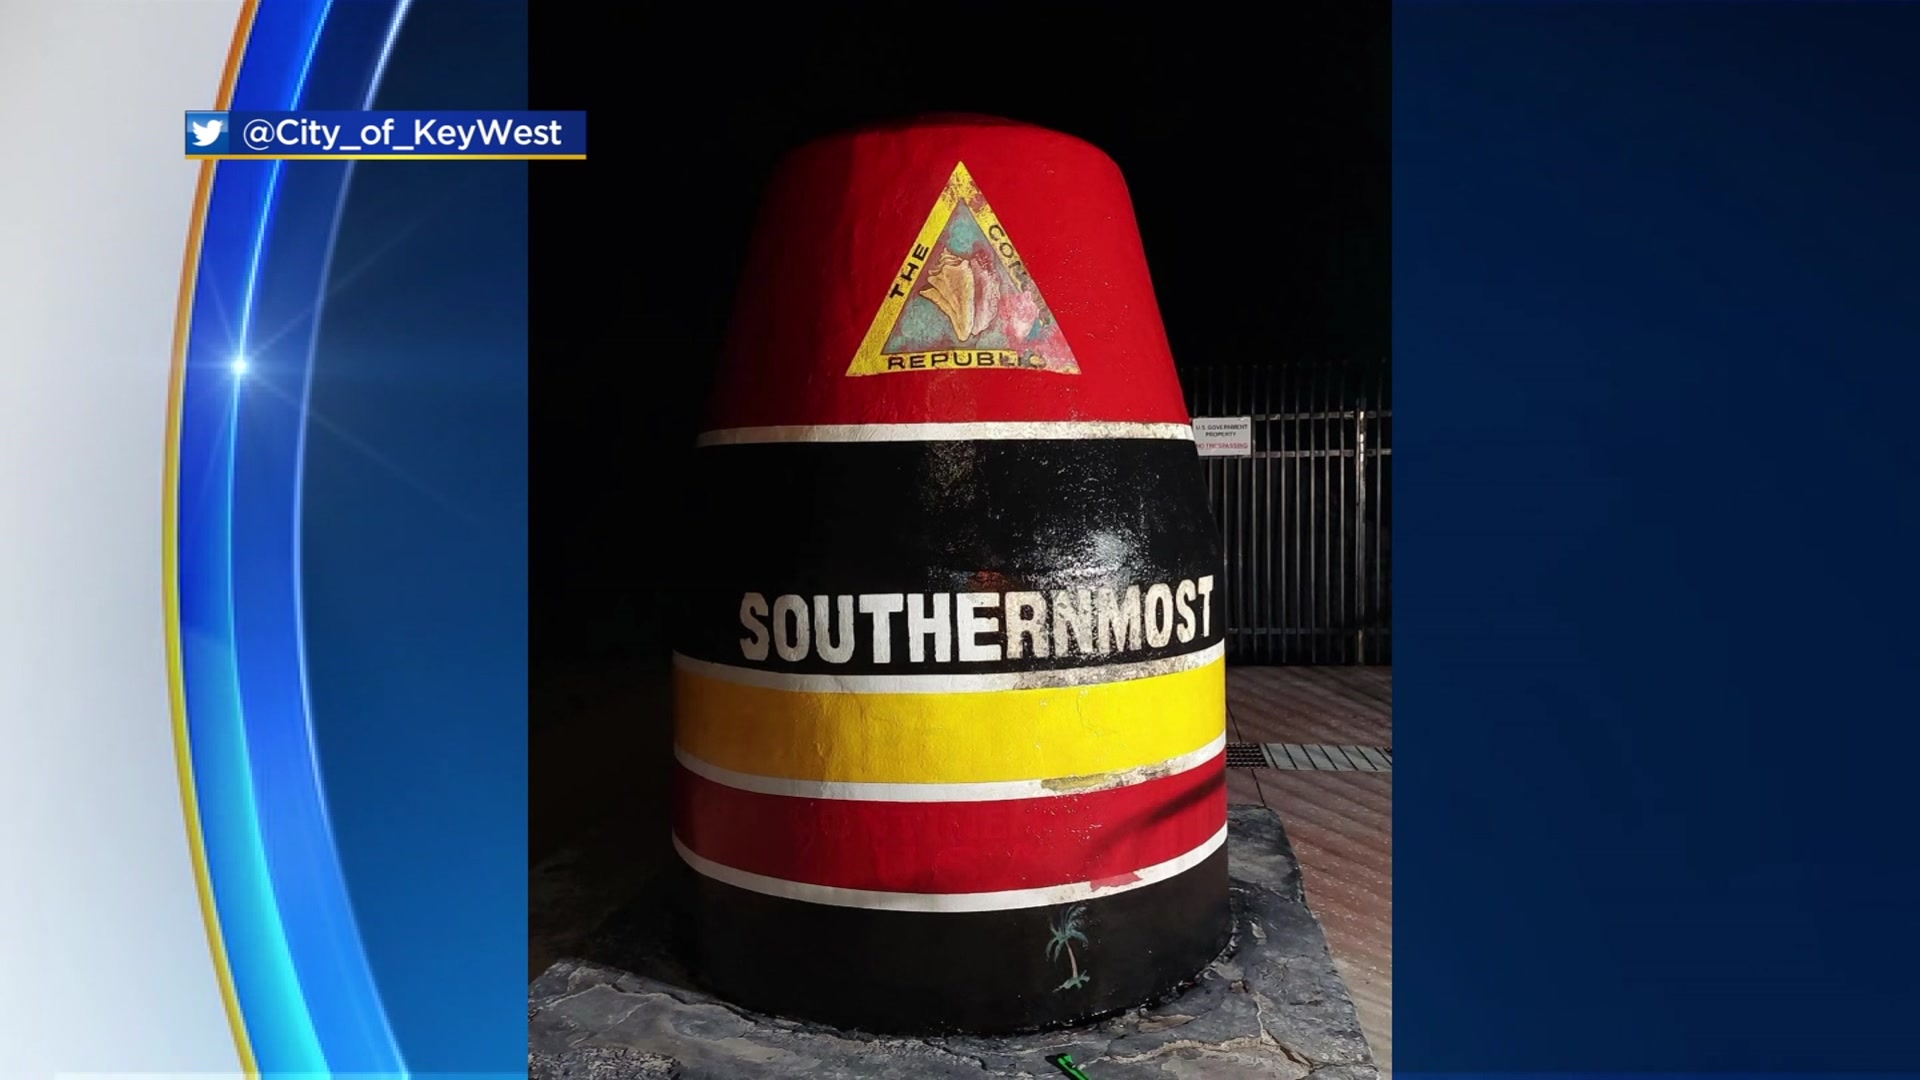 Iconic Key West Buoy Nearly Repaired After Vandals Caused Severe Fire Damage